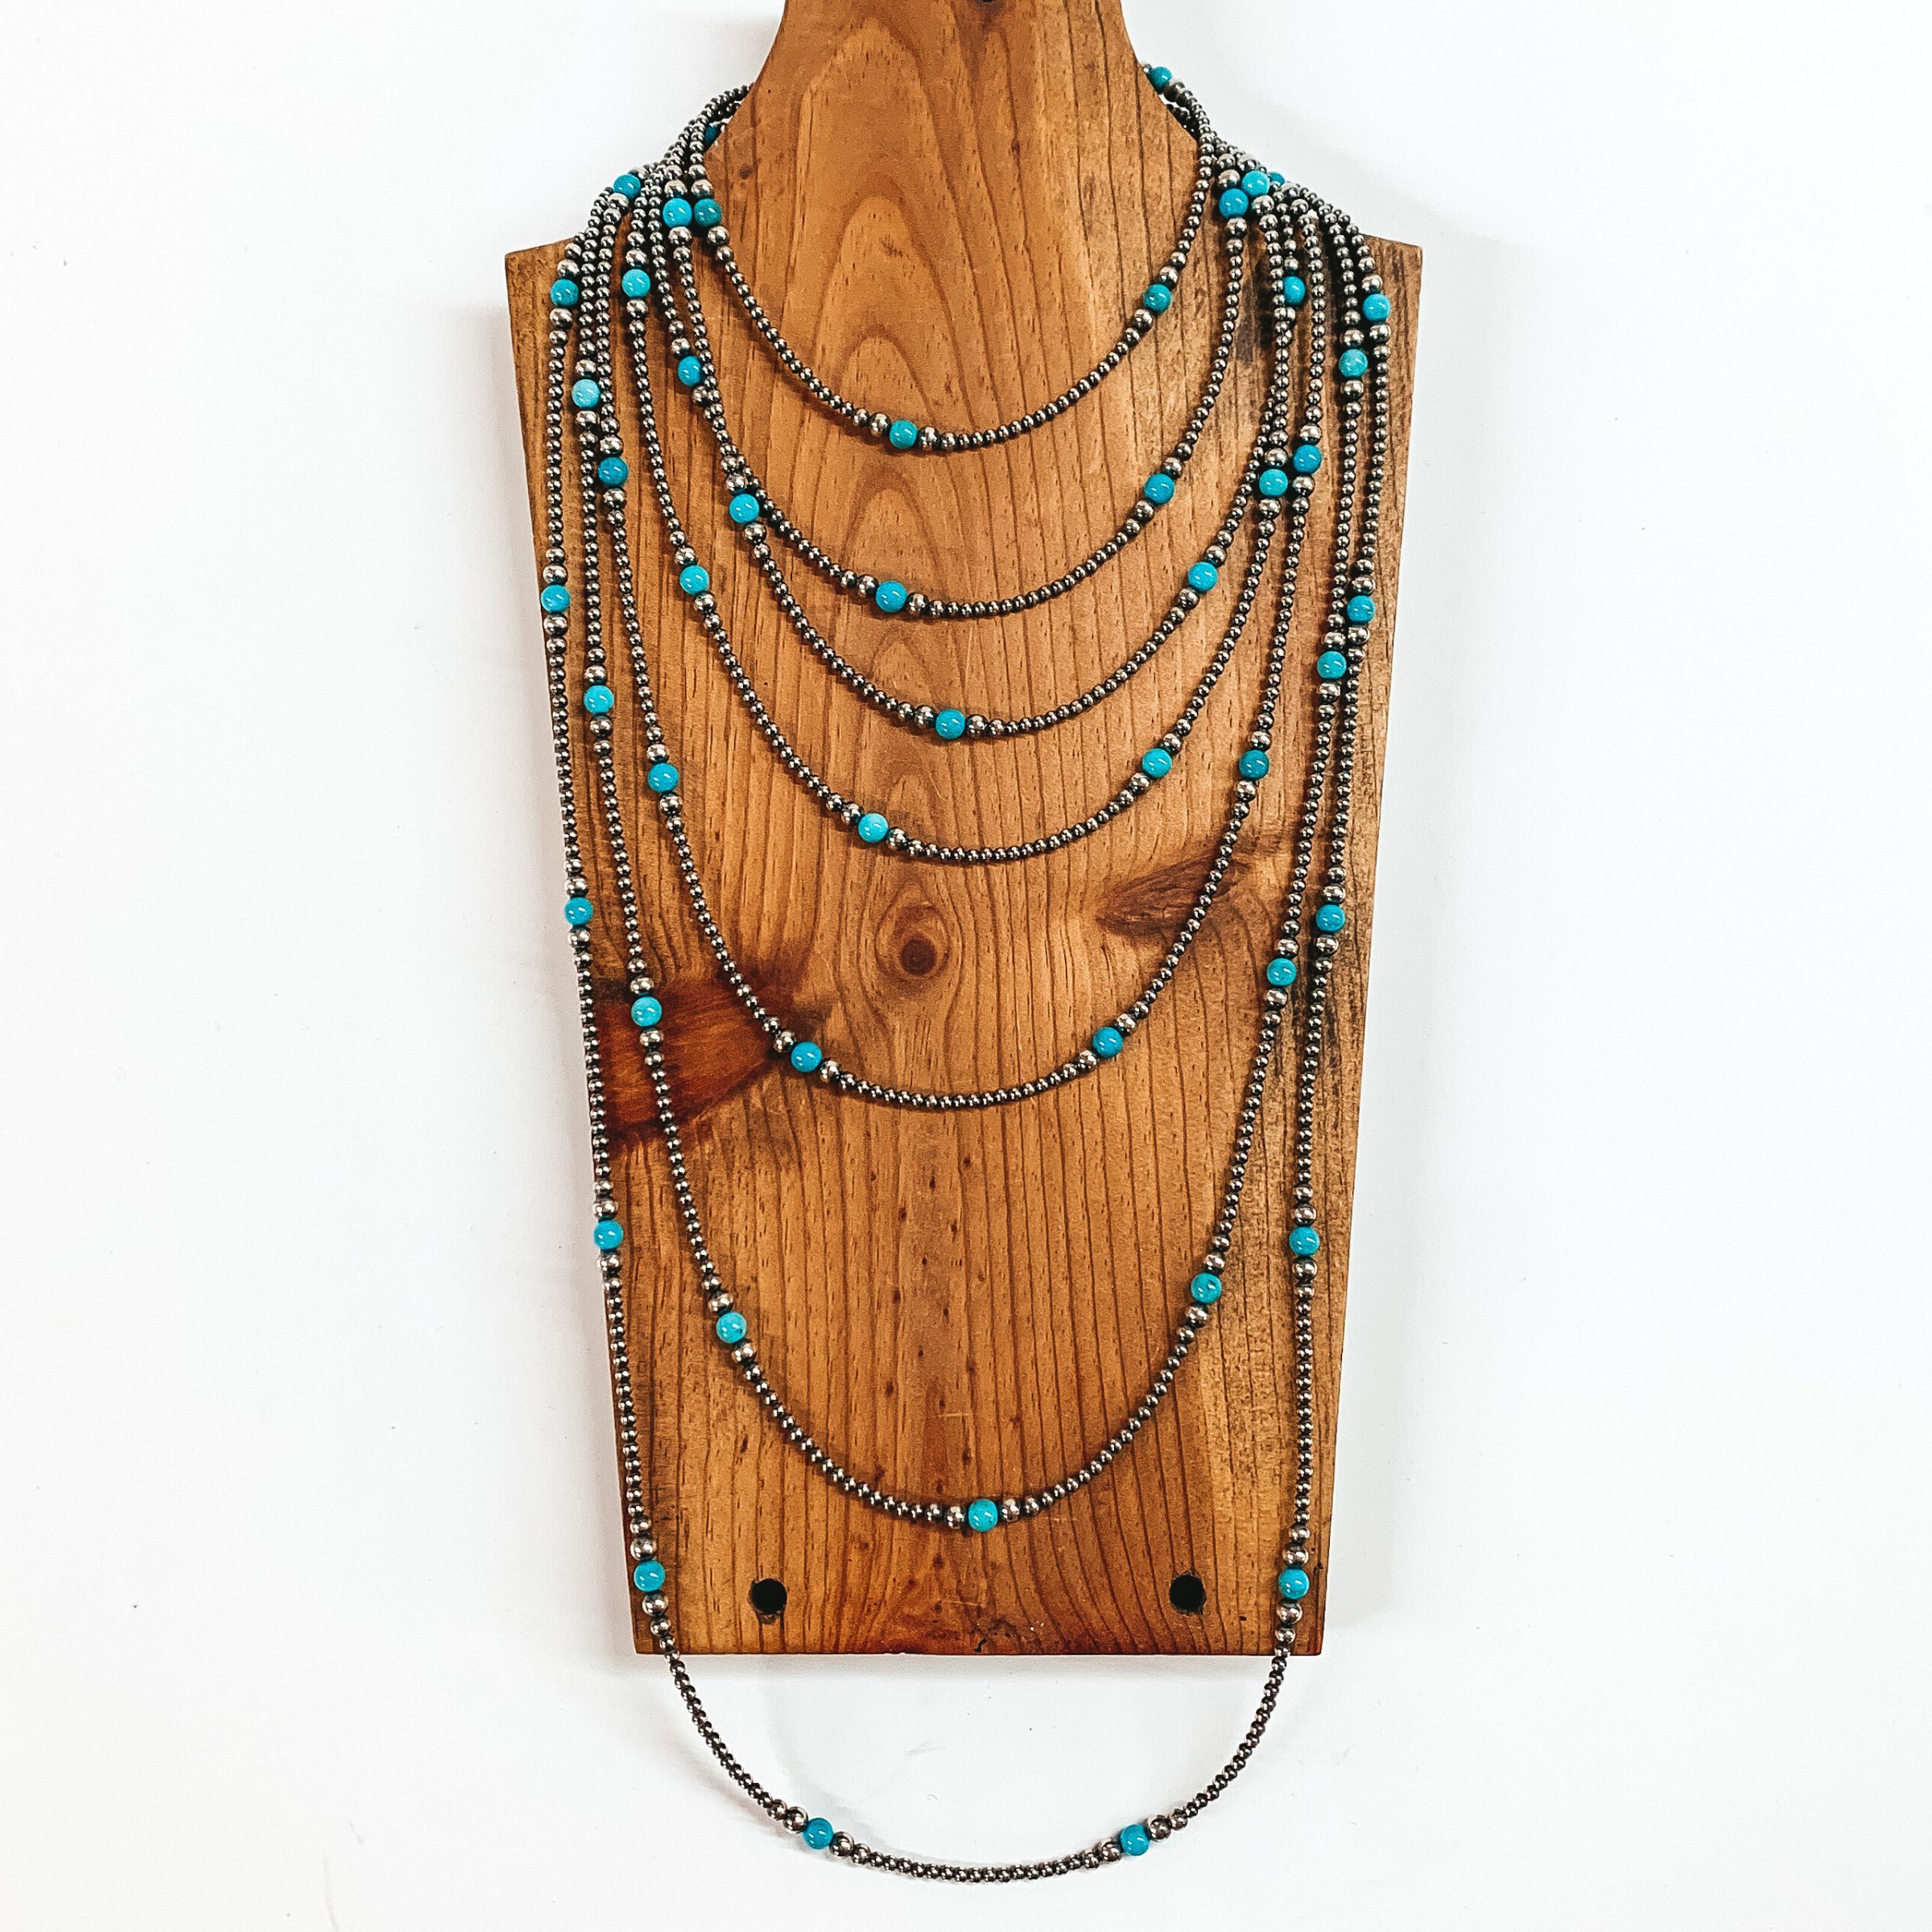 Navajo | Navajo Handmade 3-6mm Navajo Pearls Necklace with Sleeping Beauty Beads | Varying Lengths - Giddy Up Glamour Boutique